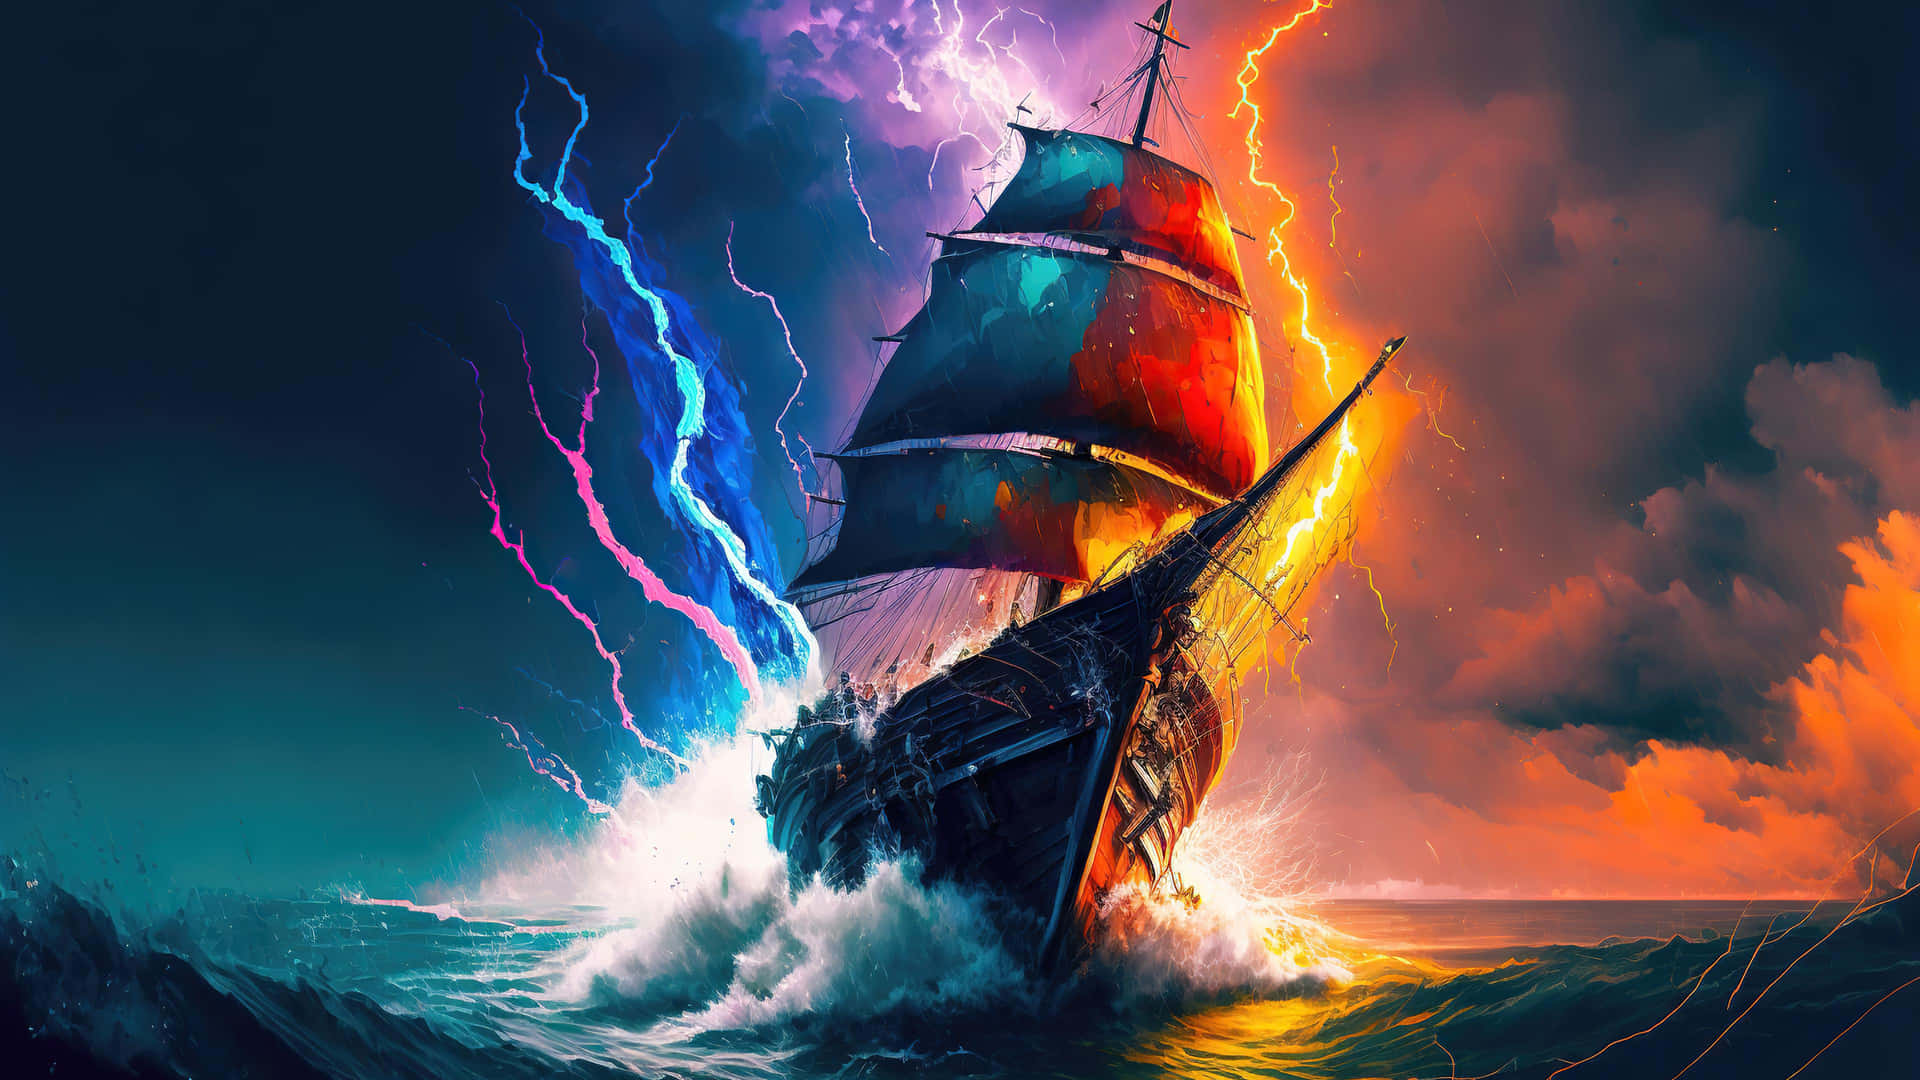 Epic_ Sea_ Storm_and_ Sailing_ Ship Background